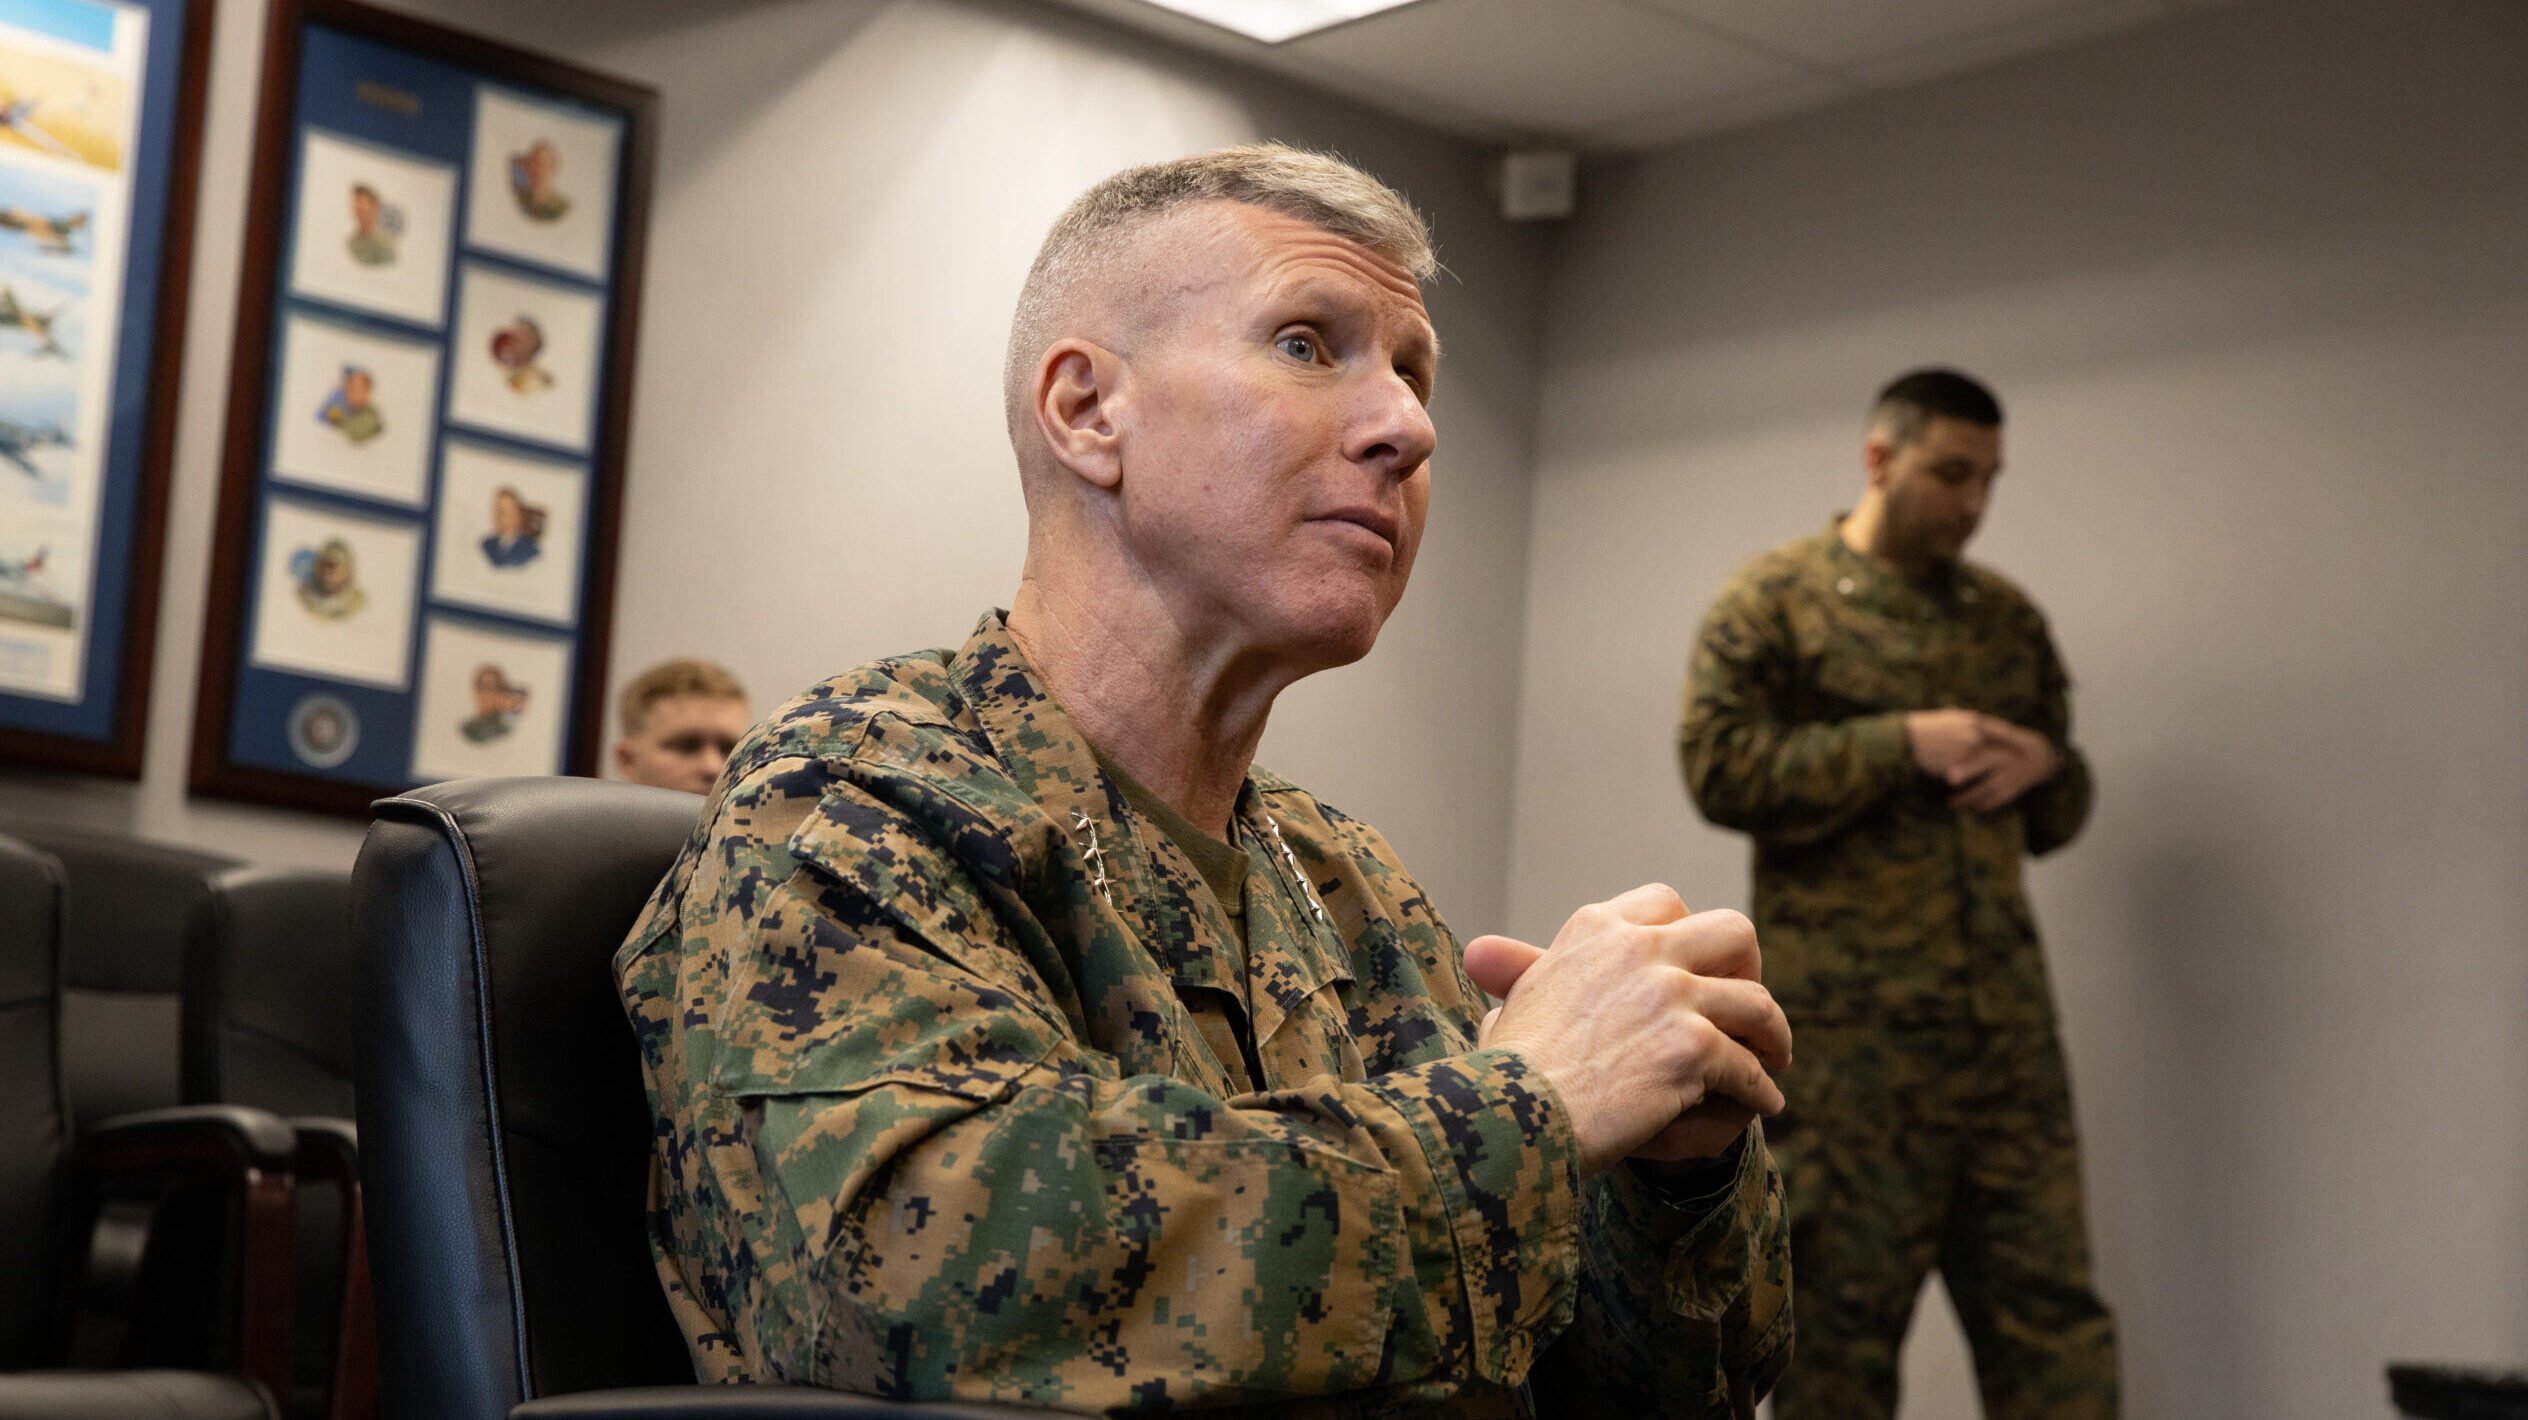 With Gen. Smith hospitalized, a 3-star is in command of Marine Corps